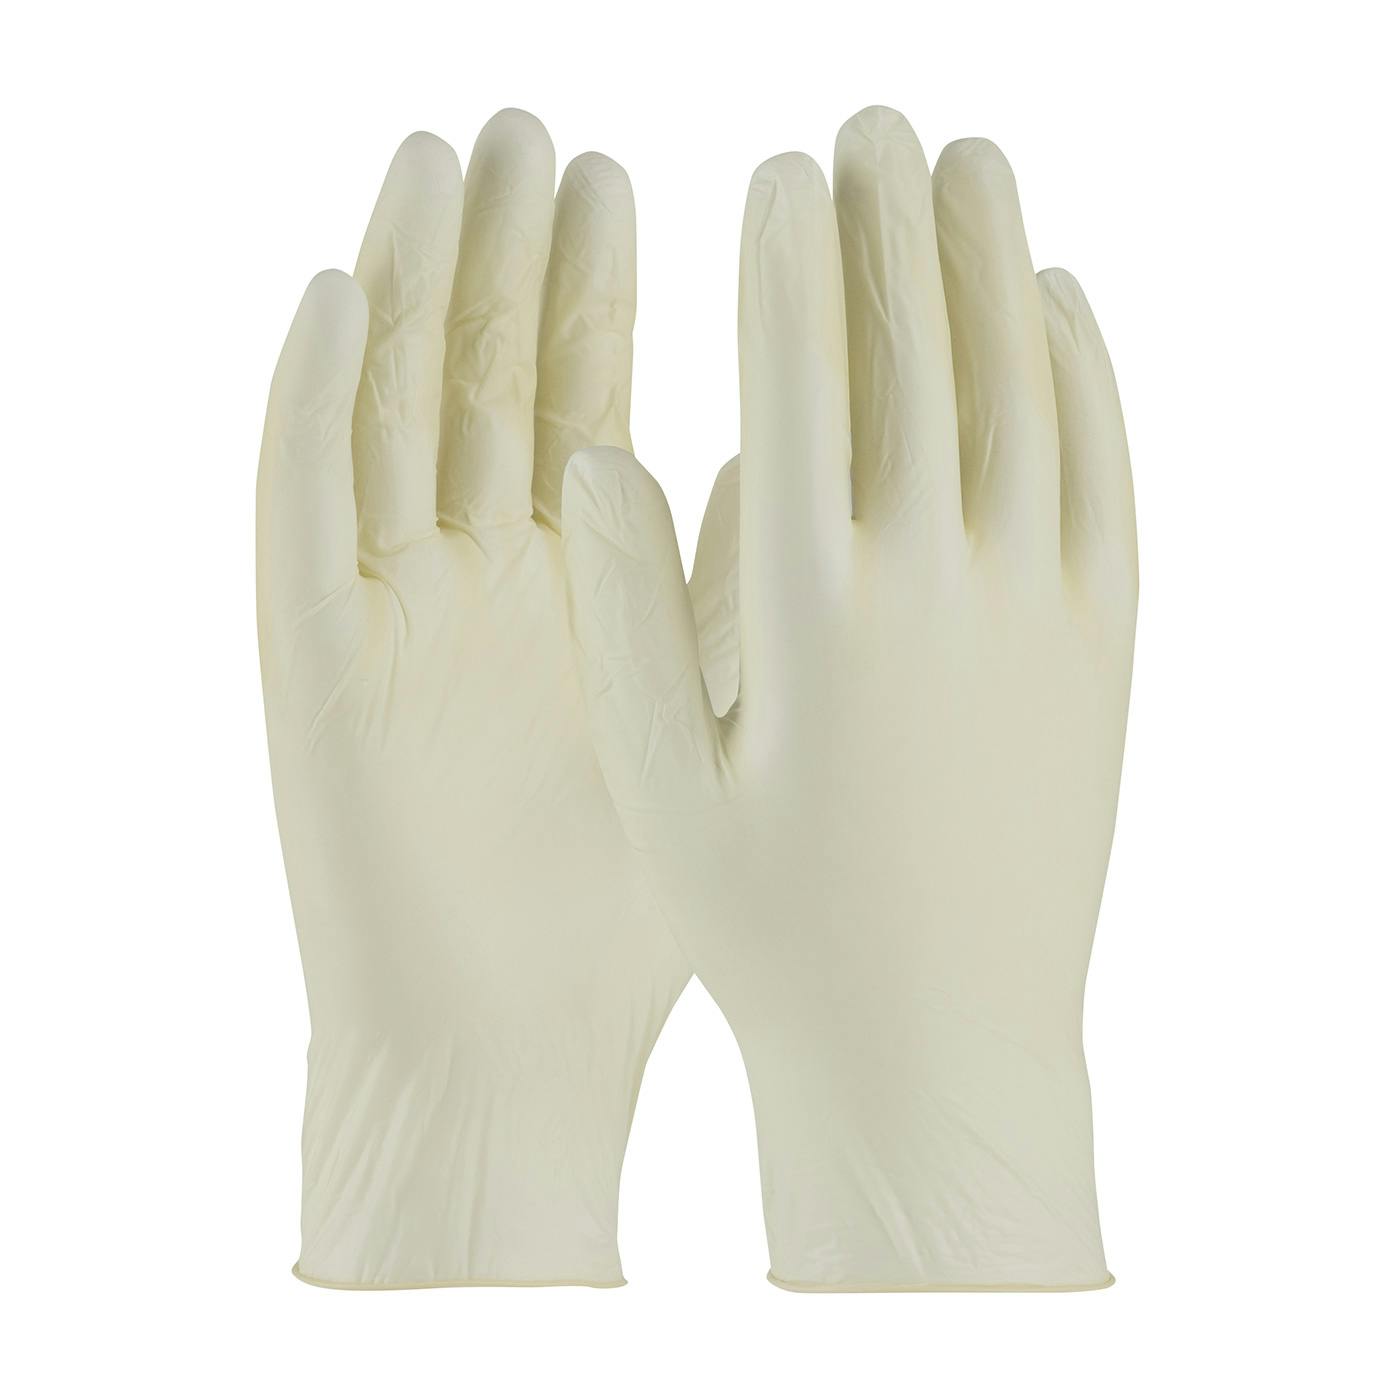 Ambi-dex® Food Grade Disposable Non-Latex Synthetic Glove, Powder-Free with Smooth Grip - 4 Mil (64-346PF)_1